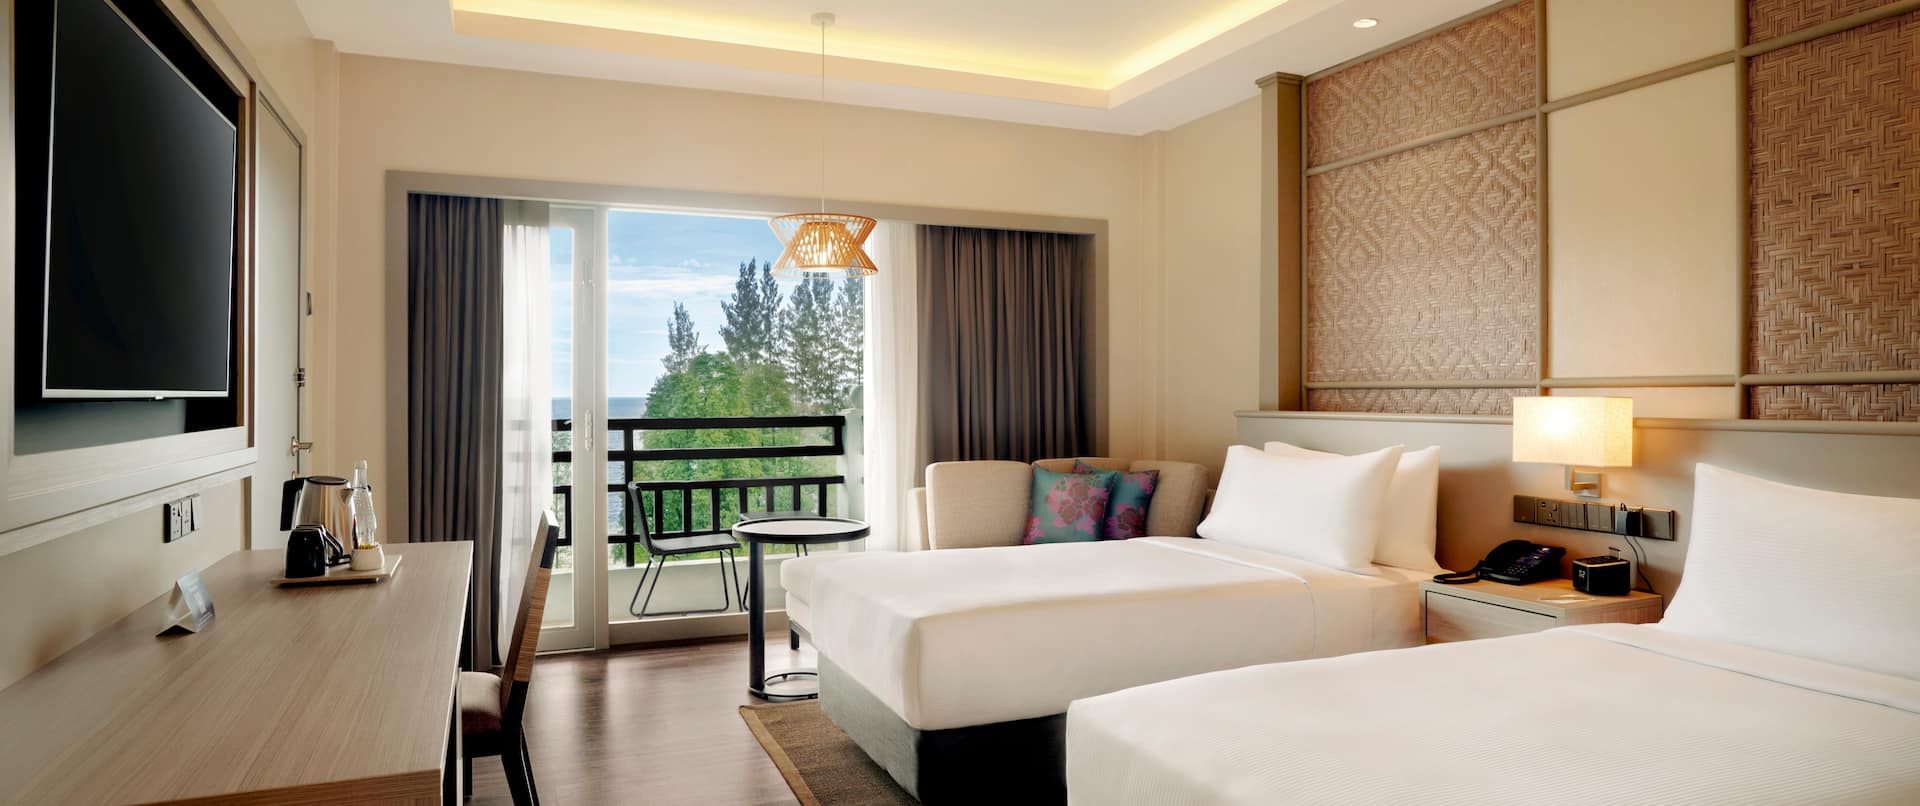 Twin beds guest room with chair, wall mounted TV and sea view